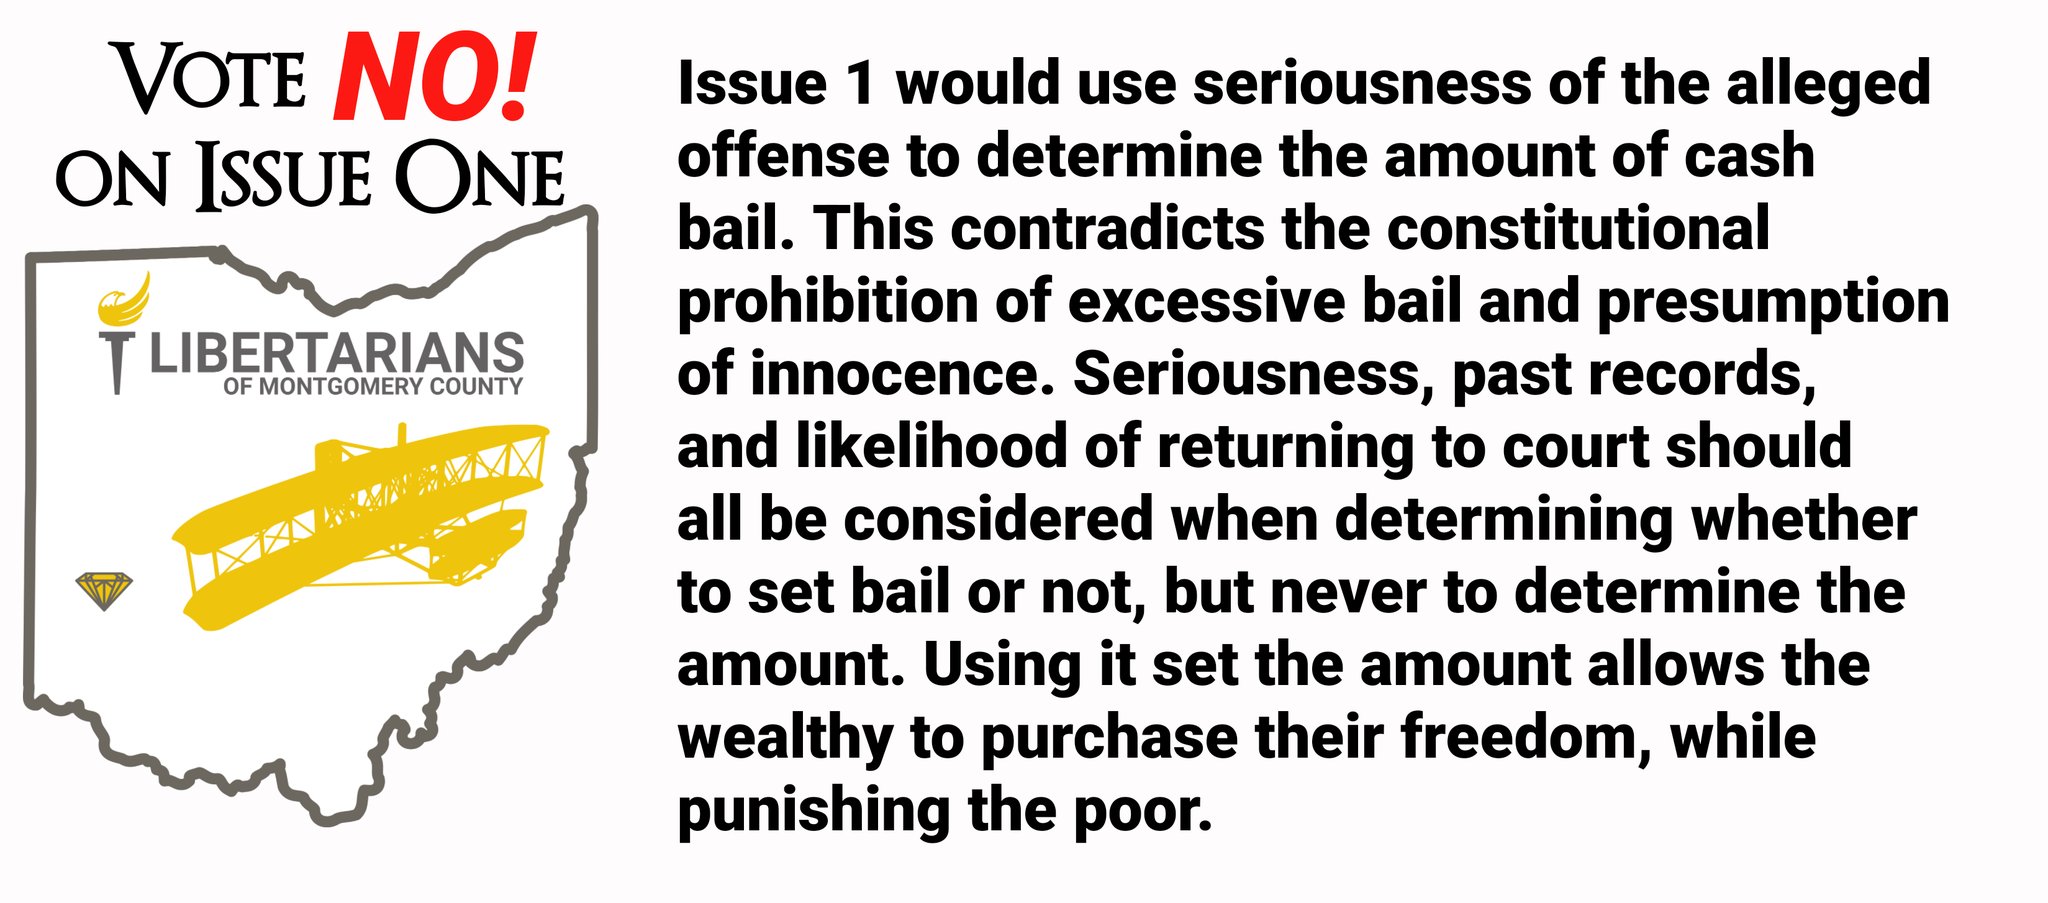 Issue 1 would use seriousness of the alleged offense to determine the amount of cash bail. This contradicts the constitutional prohibition of excessive bail and presumption of innocence. Seriousness, past records, and likelihood of returning to court should all be considered when determining whether to set bail or not, but never to determine the amount. Using it set the amount allows the wealthy to purchase their freedom, while punishing the poor. We recommend voting No on Issue 1.